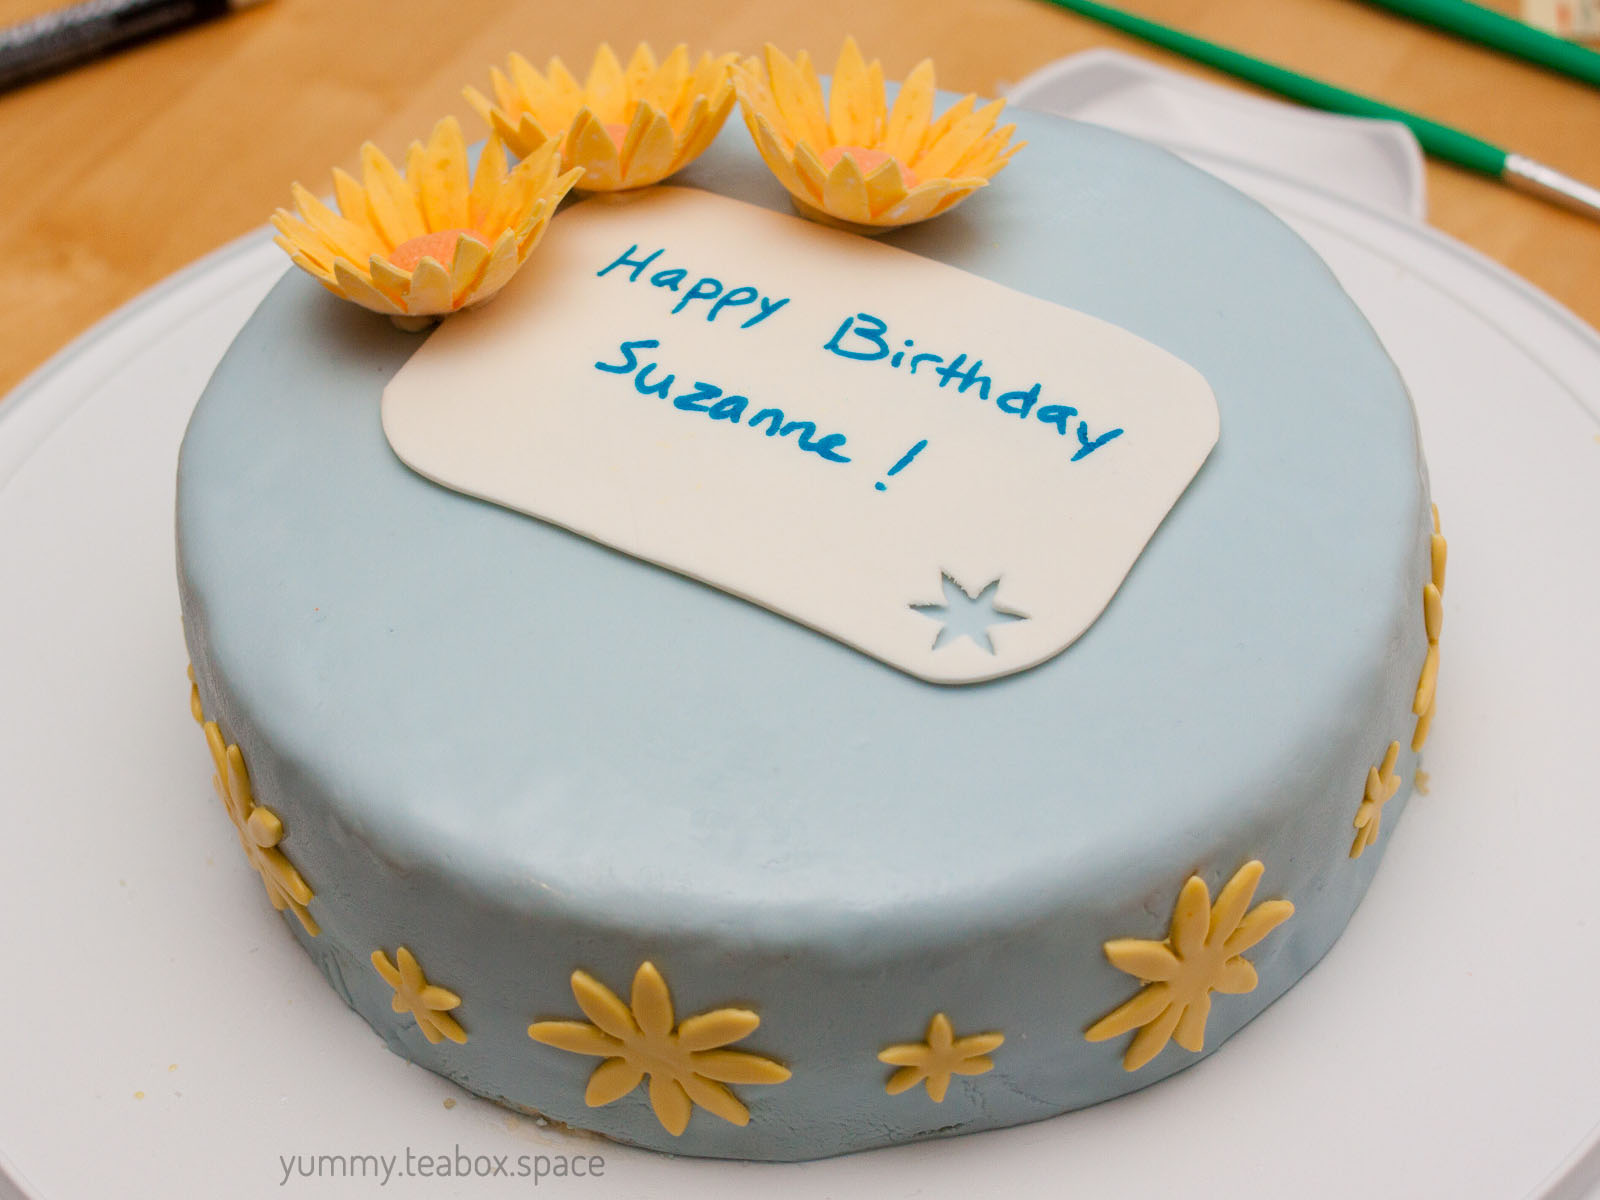 Round cake covered in blue fondant with yellow flowers on the top left and yellow flowers around the edge. It says Happy Birthday Suzanne in the center.